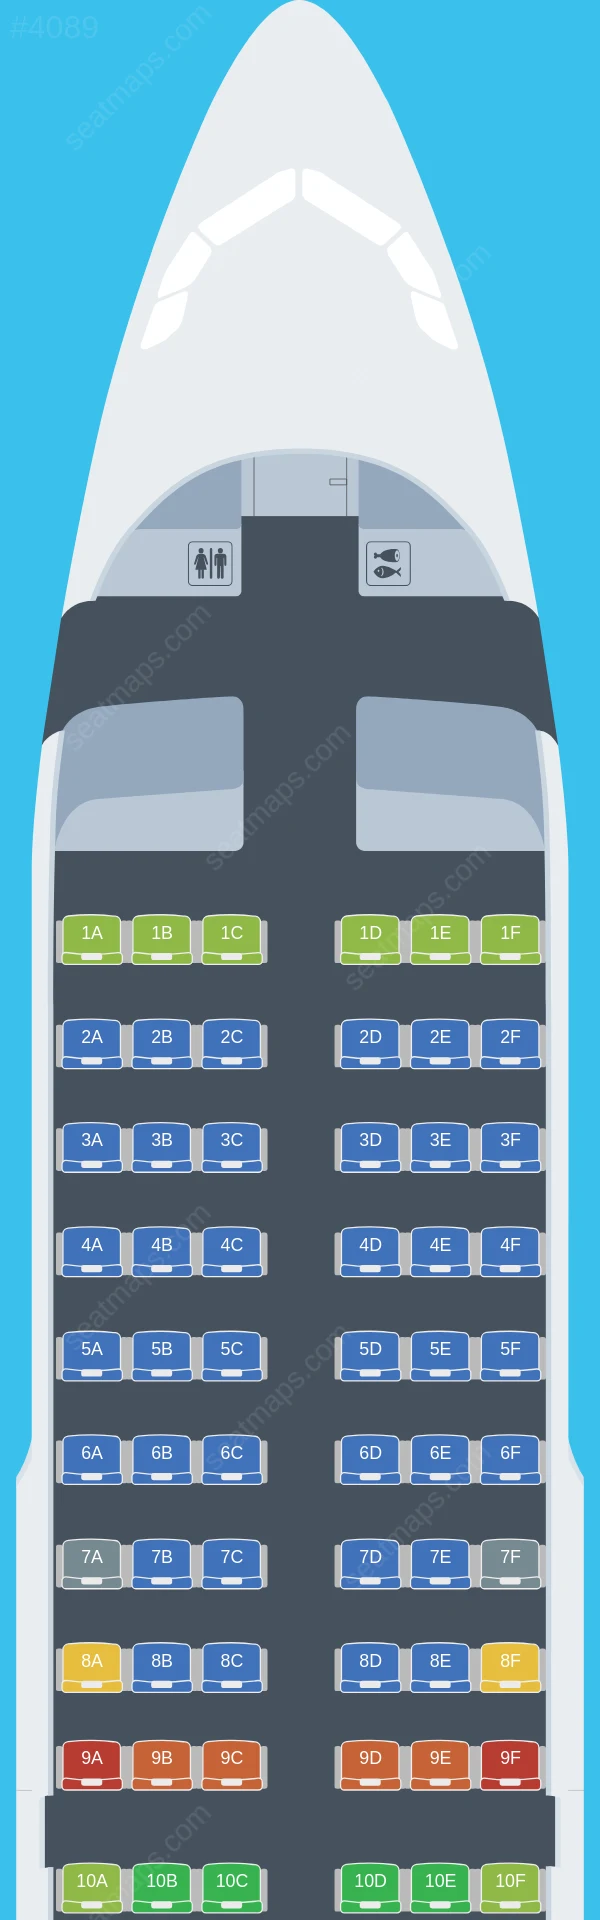 Croatia Airlines Airbus A319-100 seatmap preview